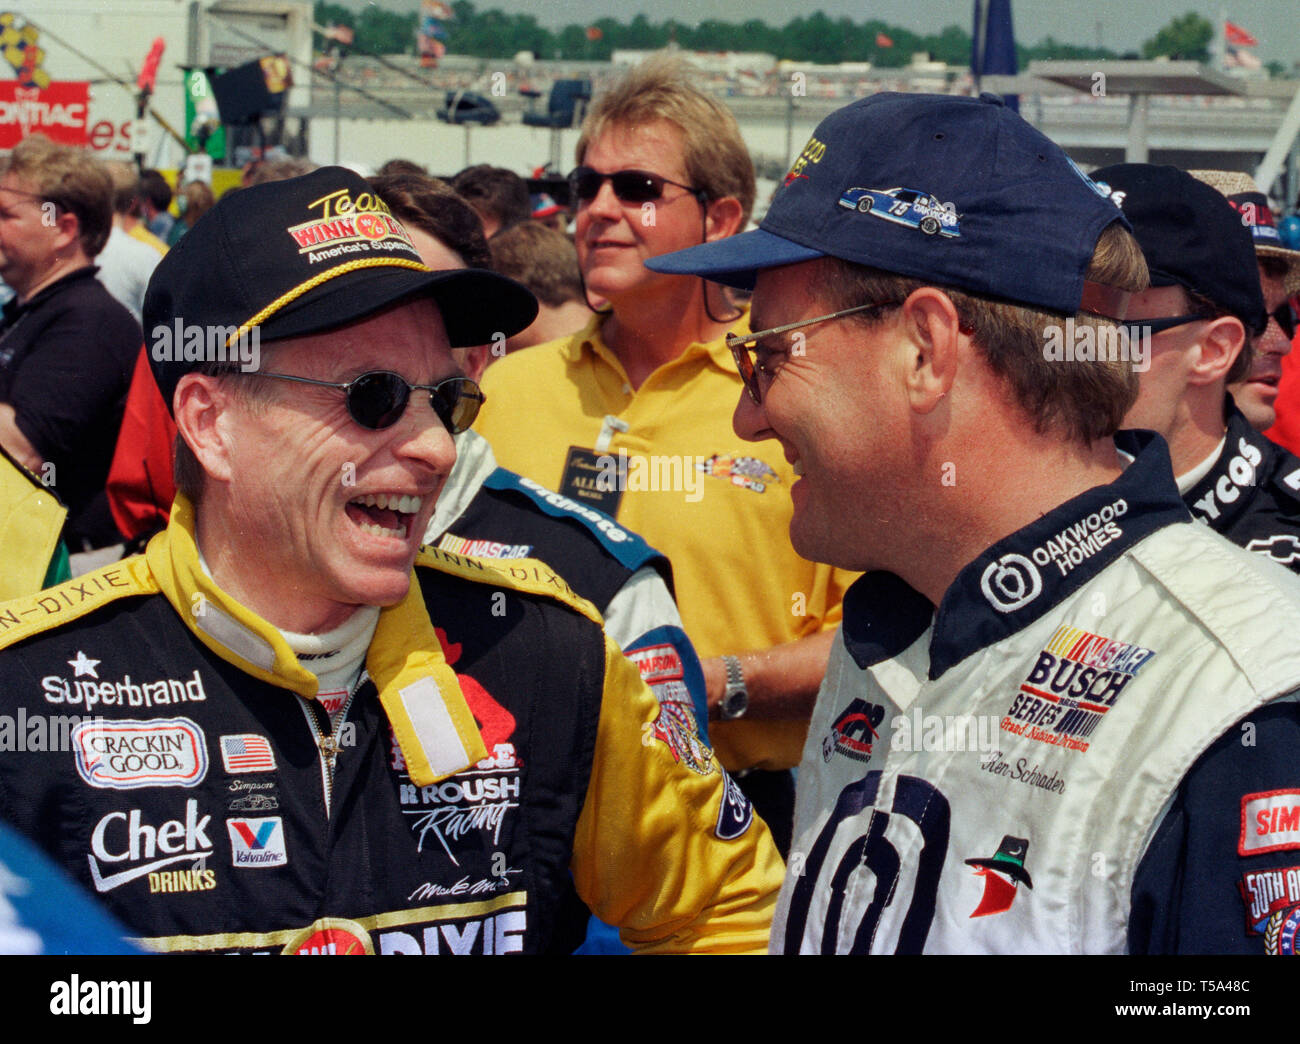 Mark Martin (L) and Kenschrader (R) on pit road prior to the NASCAR Busch Series race at North Carolina Speedway in Rockingham North Carolina on November 1, 1998. Stock Photo